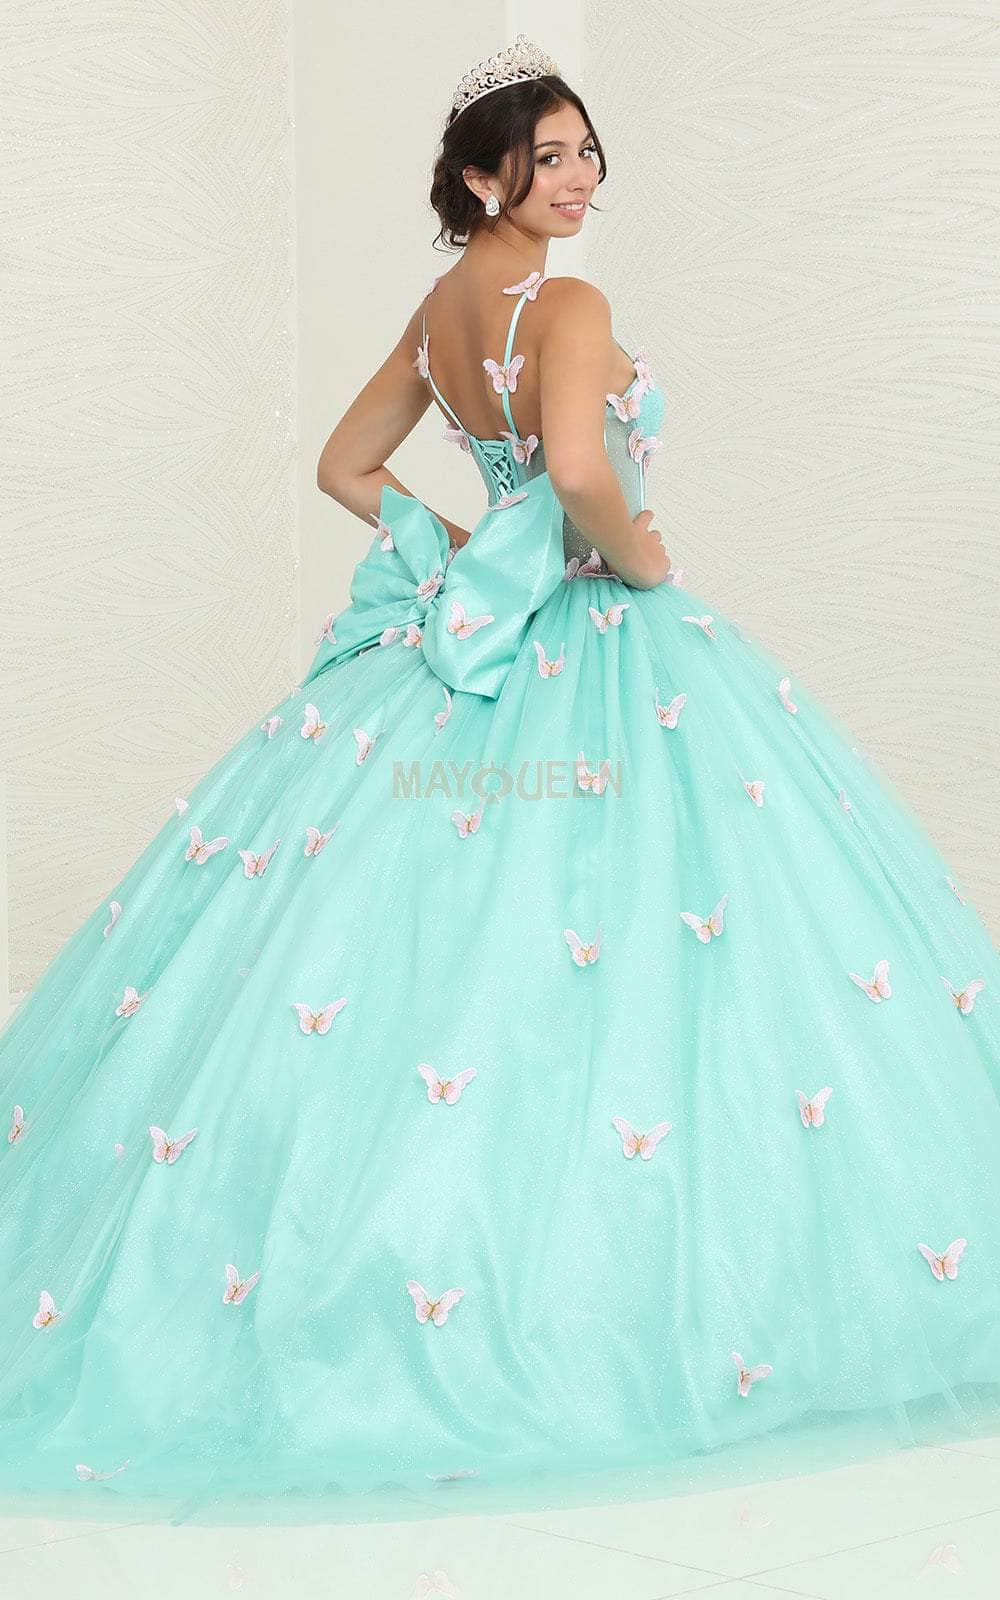 May Queen LK239 - Butterfly Applique Ballgown Special Occasion Dresses